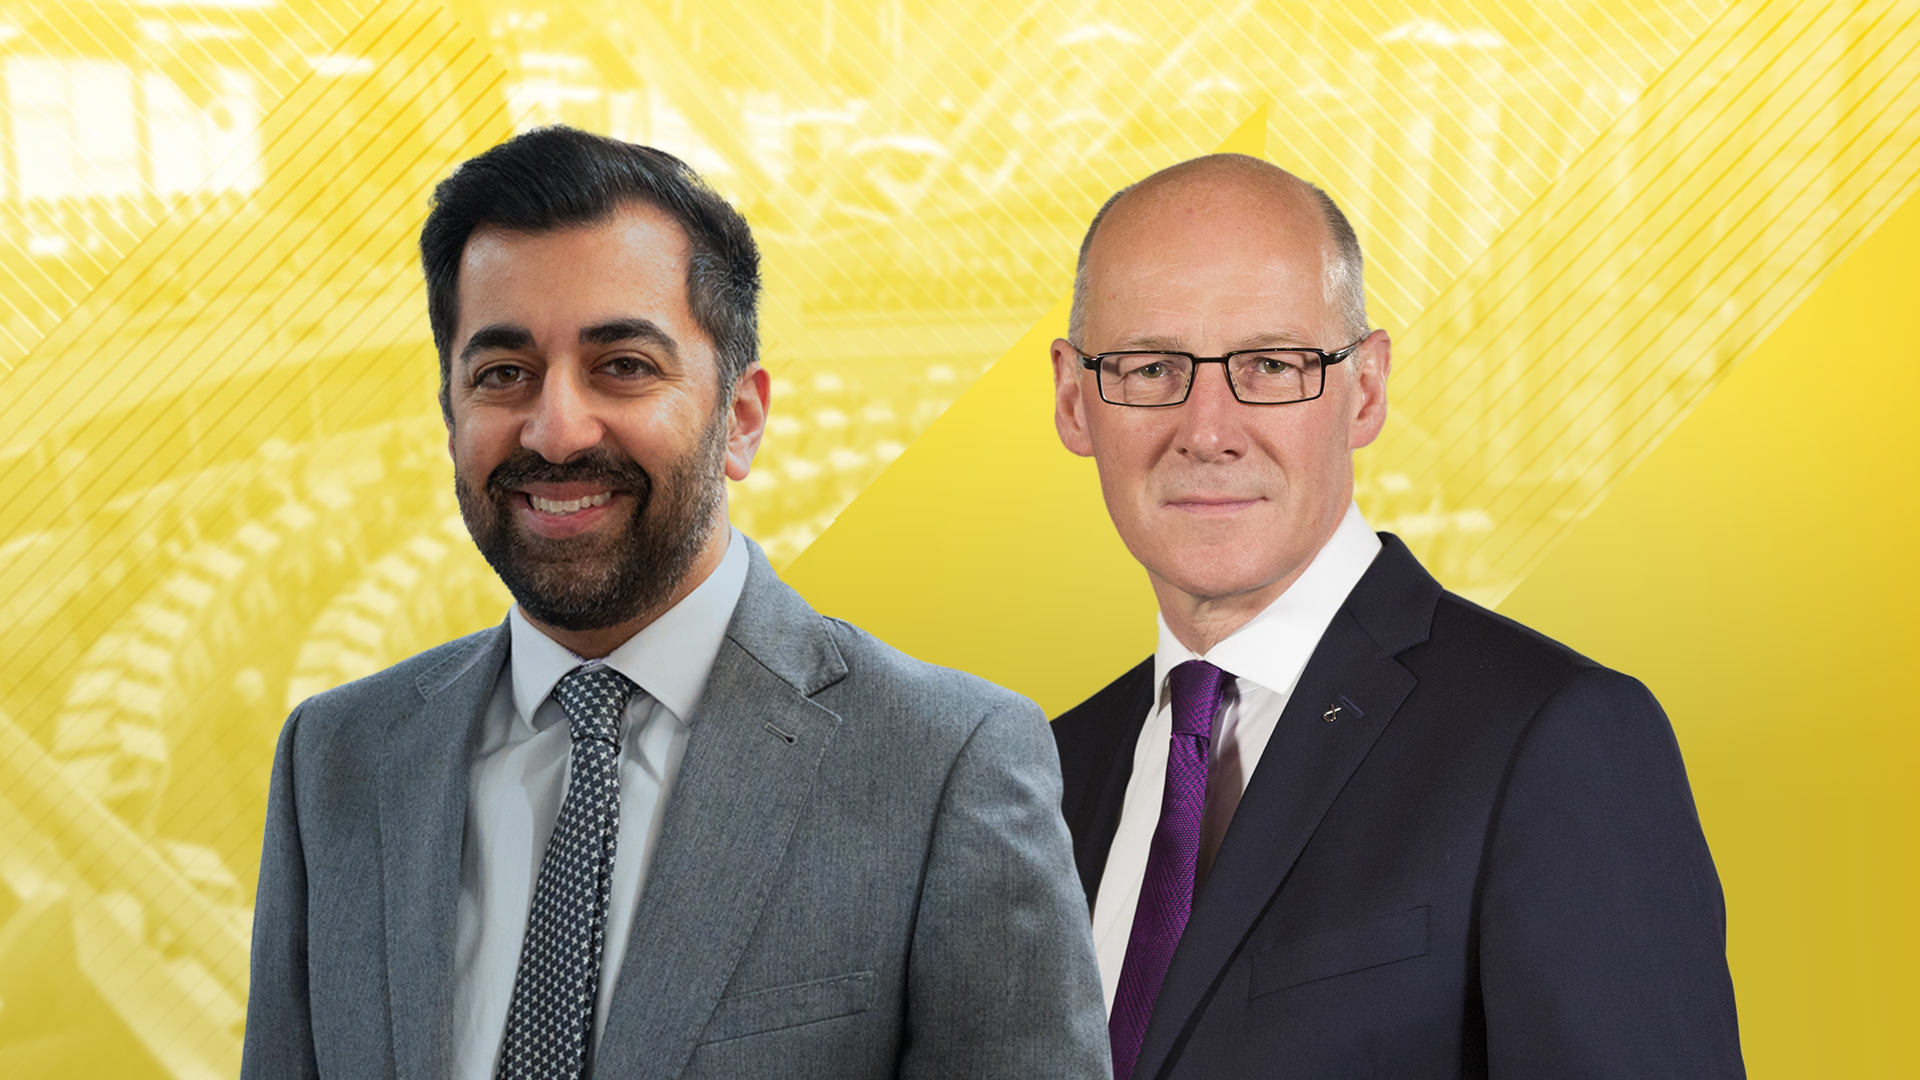 John Swinney announces bid to succeed Humza Yousaf as SNP leader and Scotland's first minister